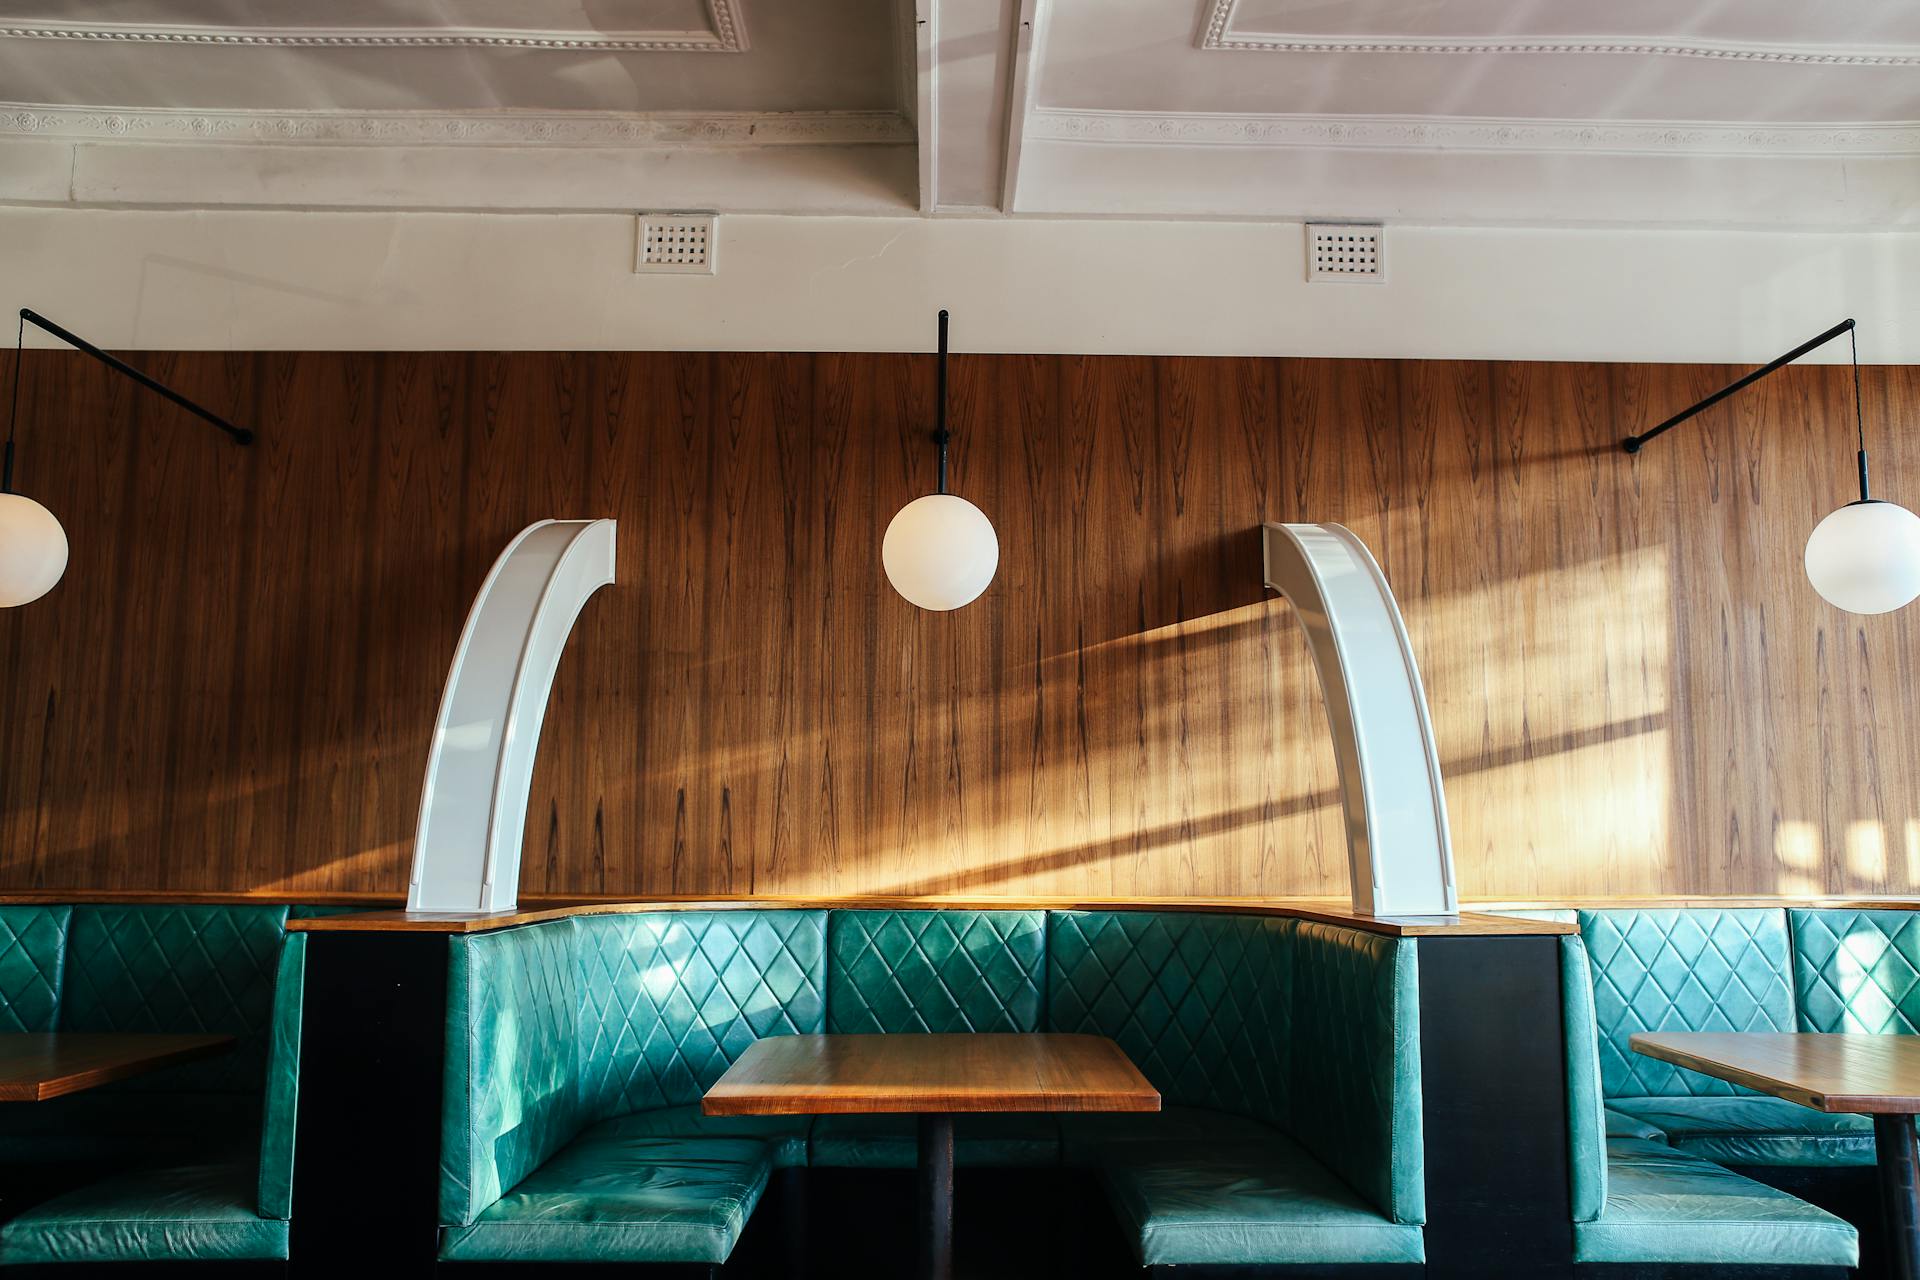 Empty booths at a diner | Source: Pexels